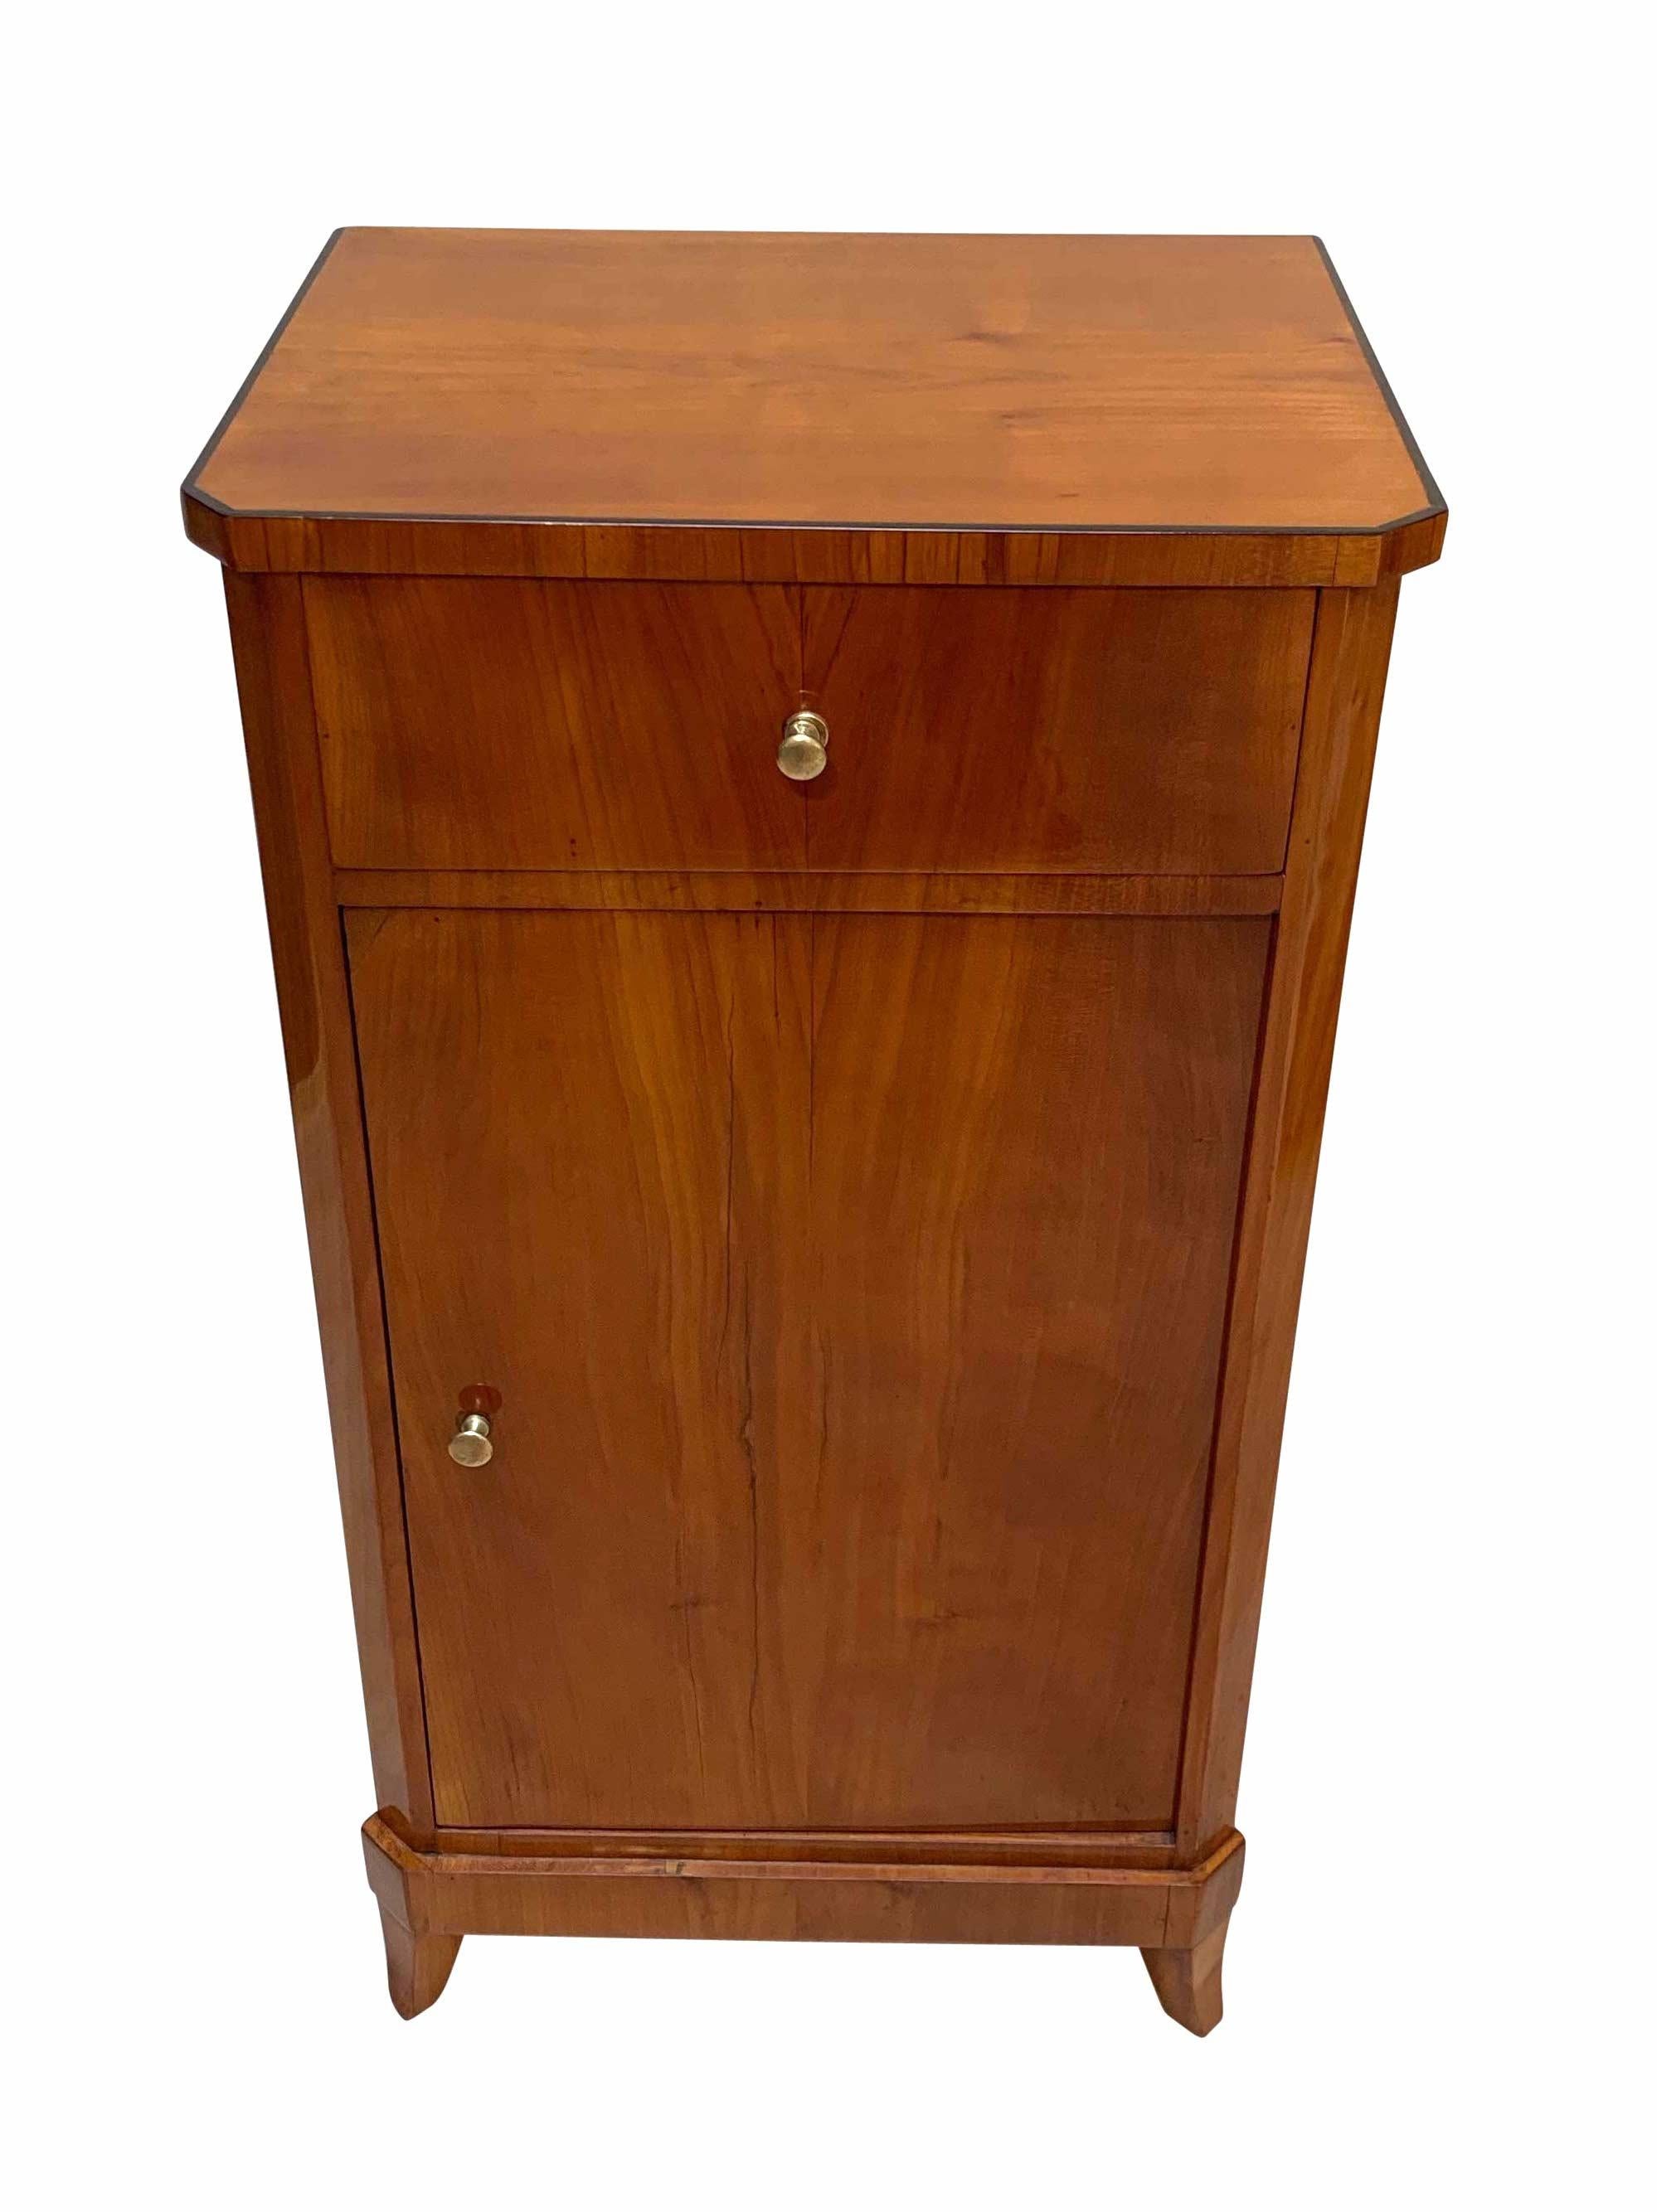 Small and very elegant Biedermeier nightstand / bedside table

Bookmatched cherry veneer, shellac hand-polished.

1 drawer and 1 door. Inside with 1 shelf. 
2 original brass knobs.